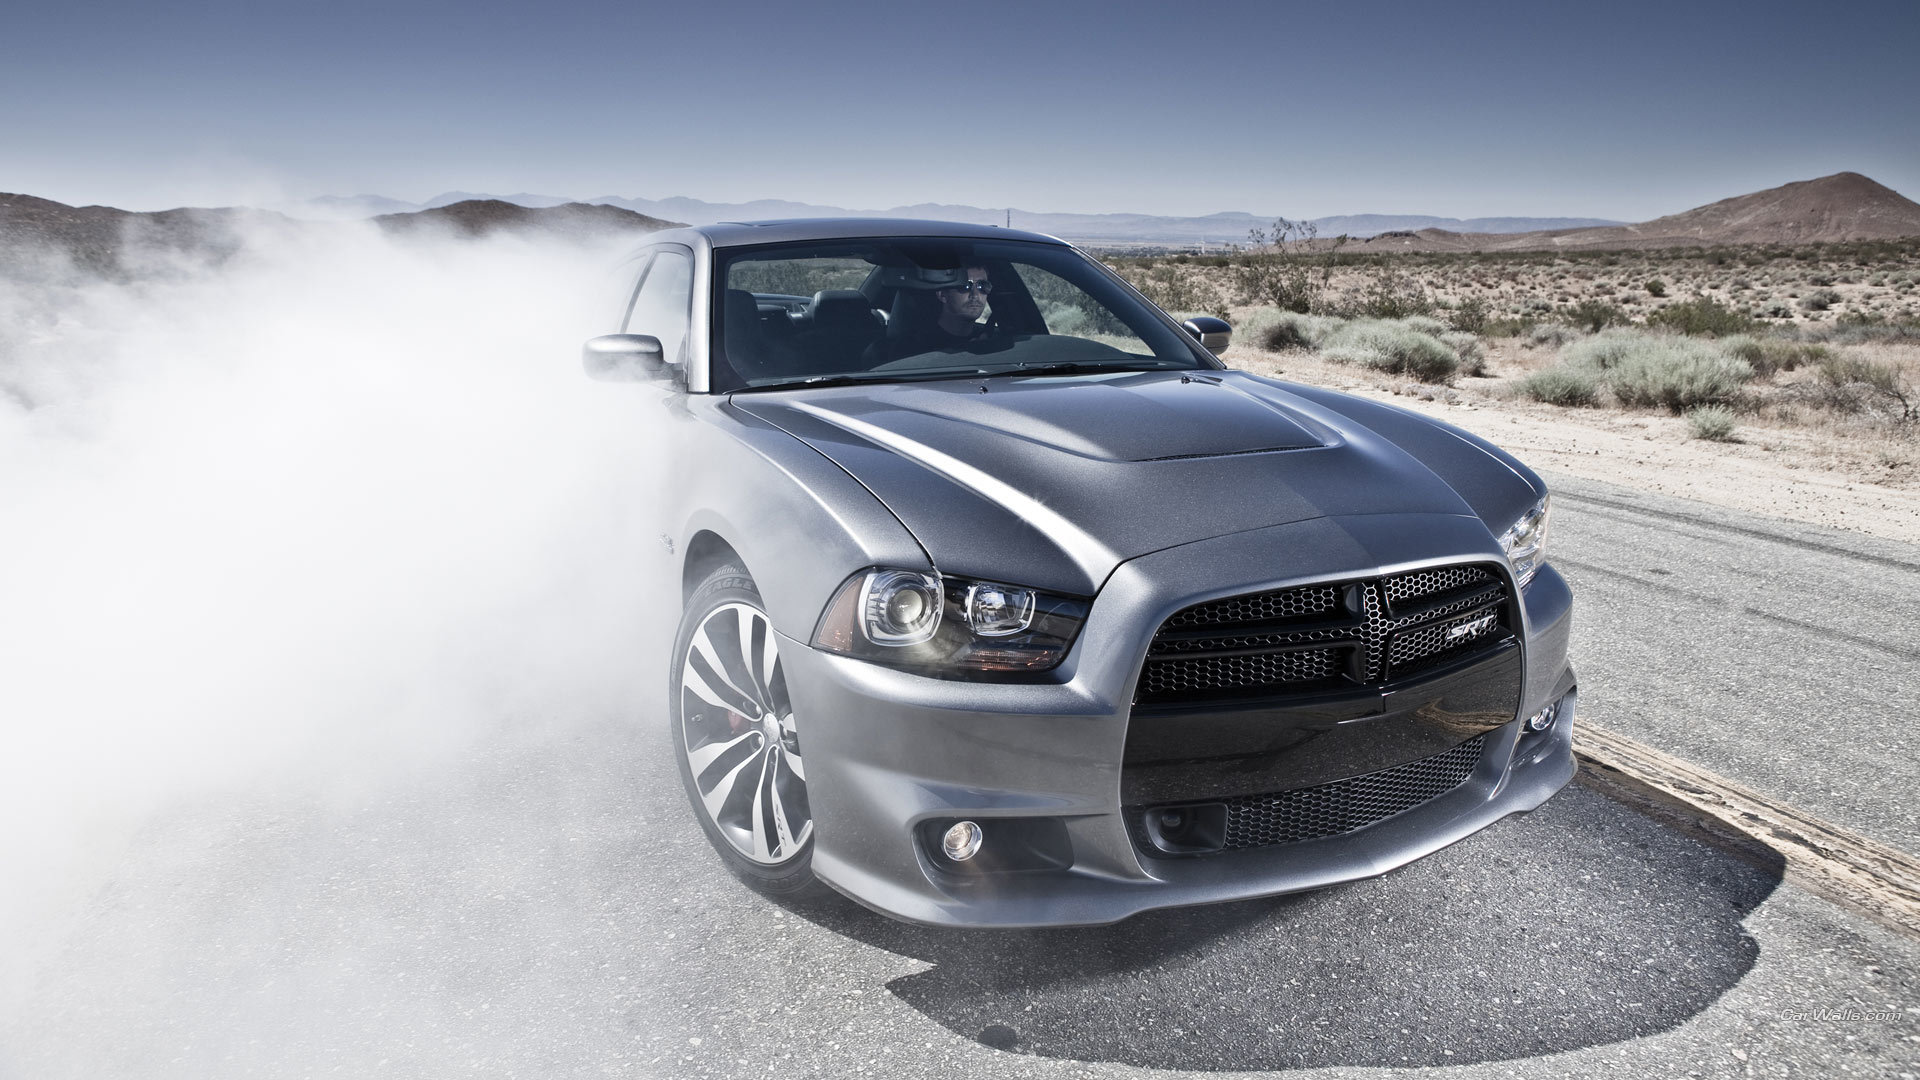 High resolution Dodge Charger Srt8 full hd wallpaper ID:277927 for computer